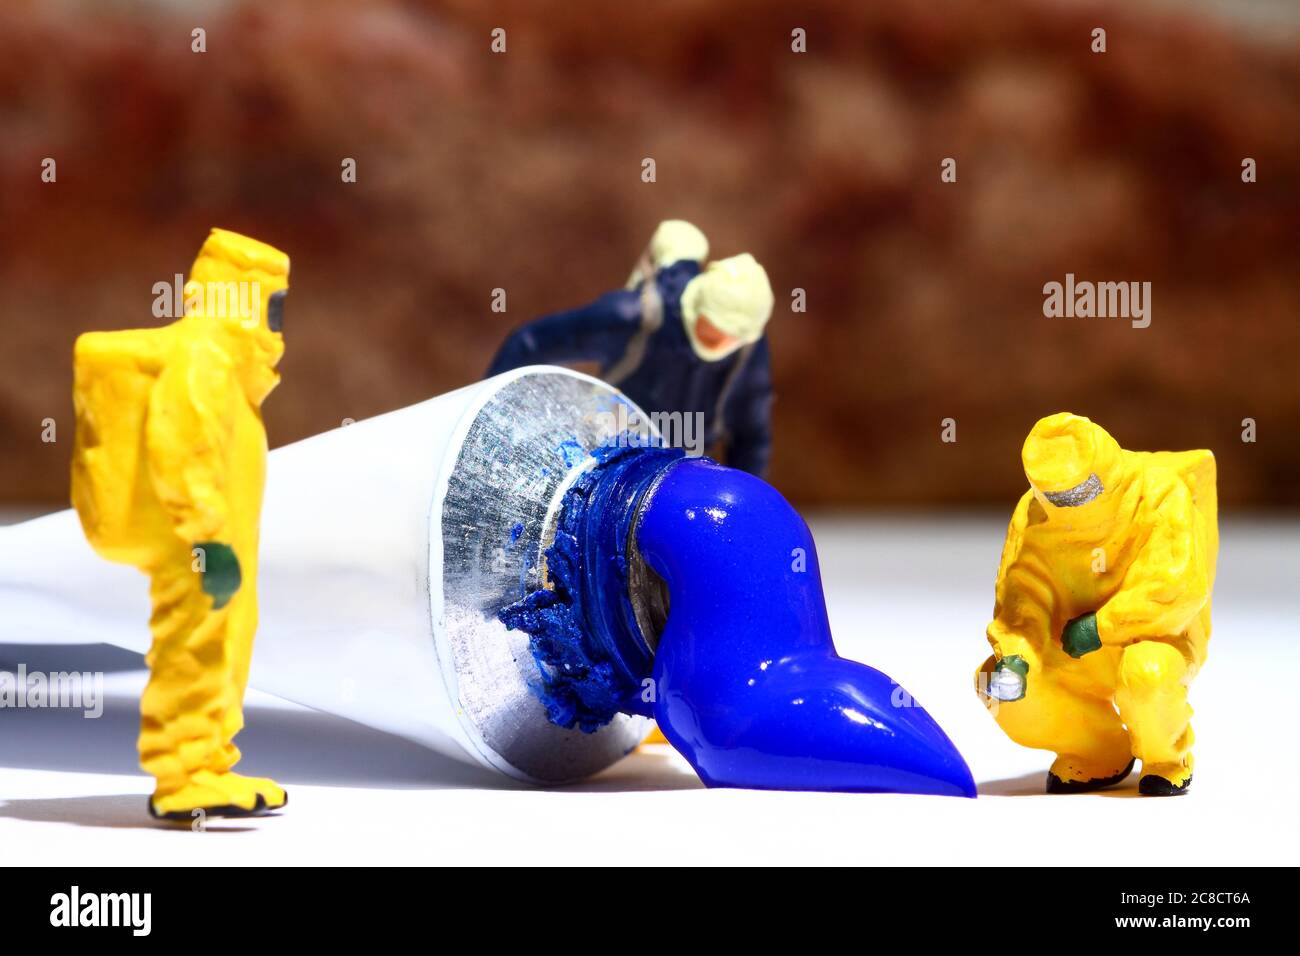 Miniature figure people wearing hazmat suits investigating a paint spill from an artists tube of acrylic paint Stock Photo